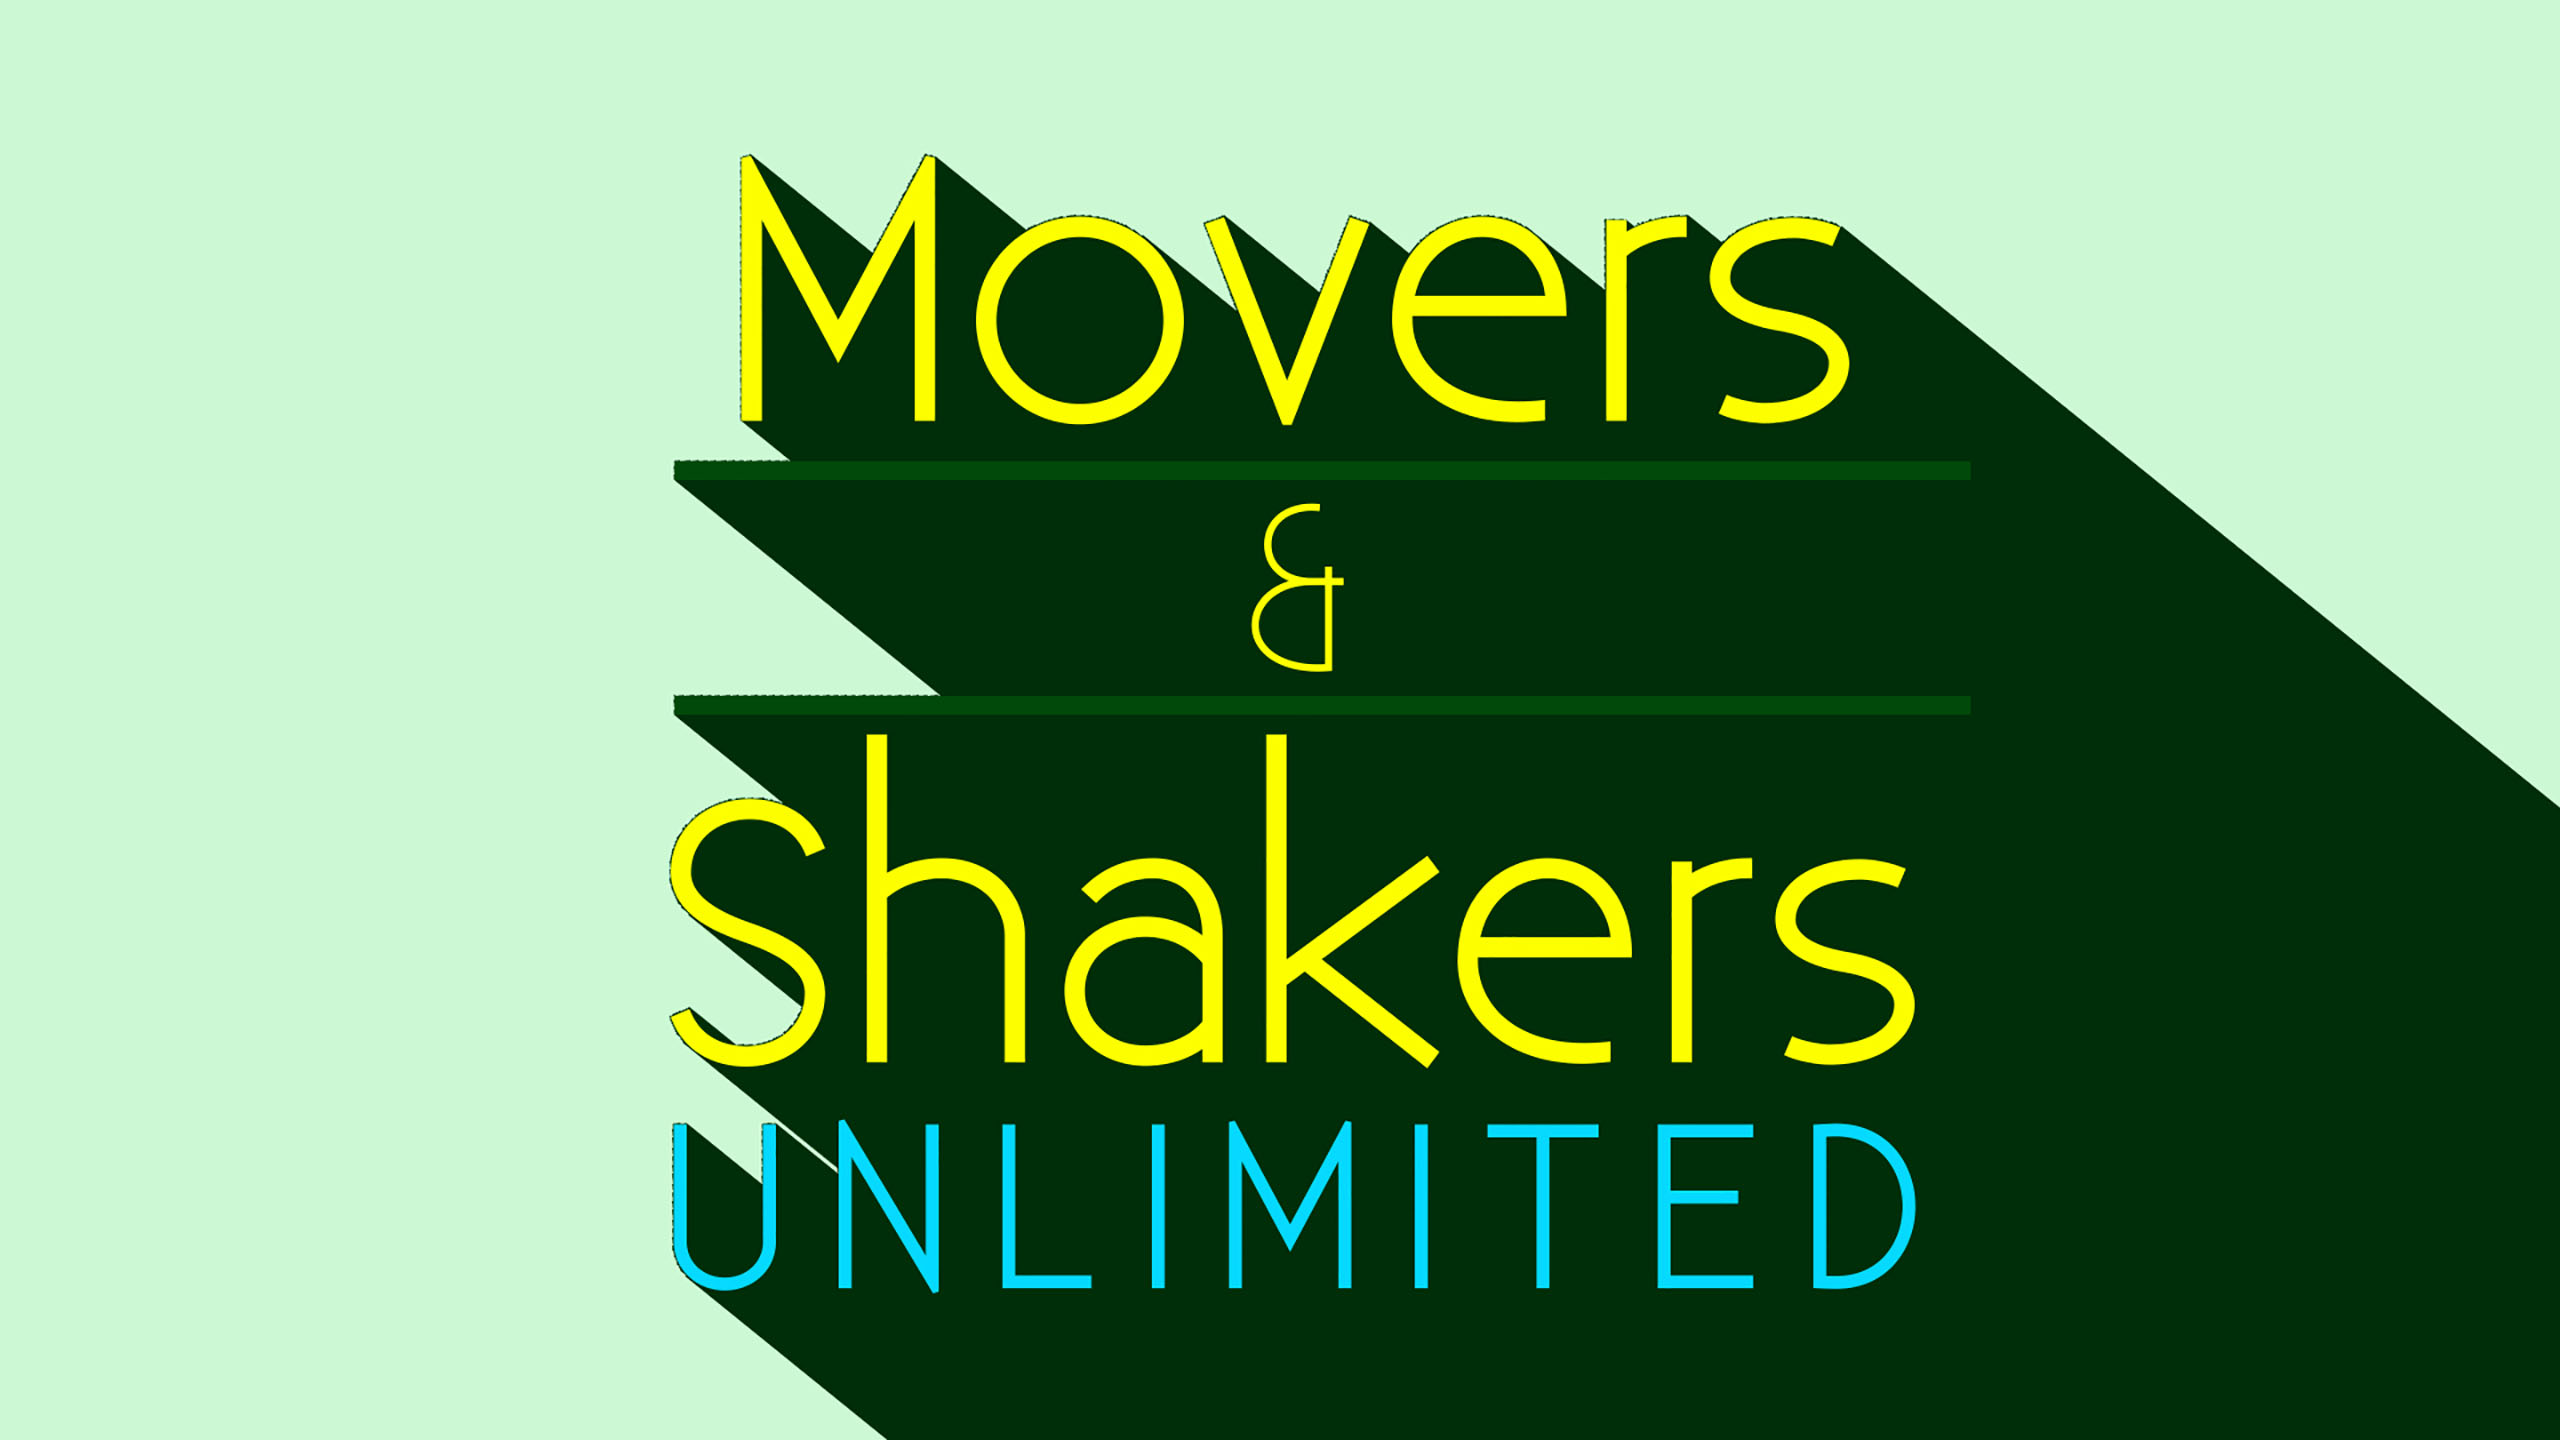 Movers & Shakers Unlimited